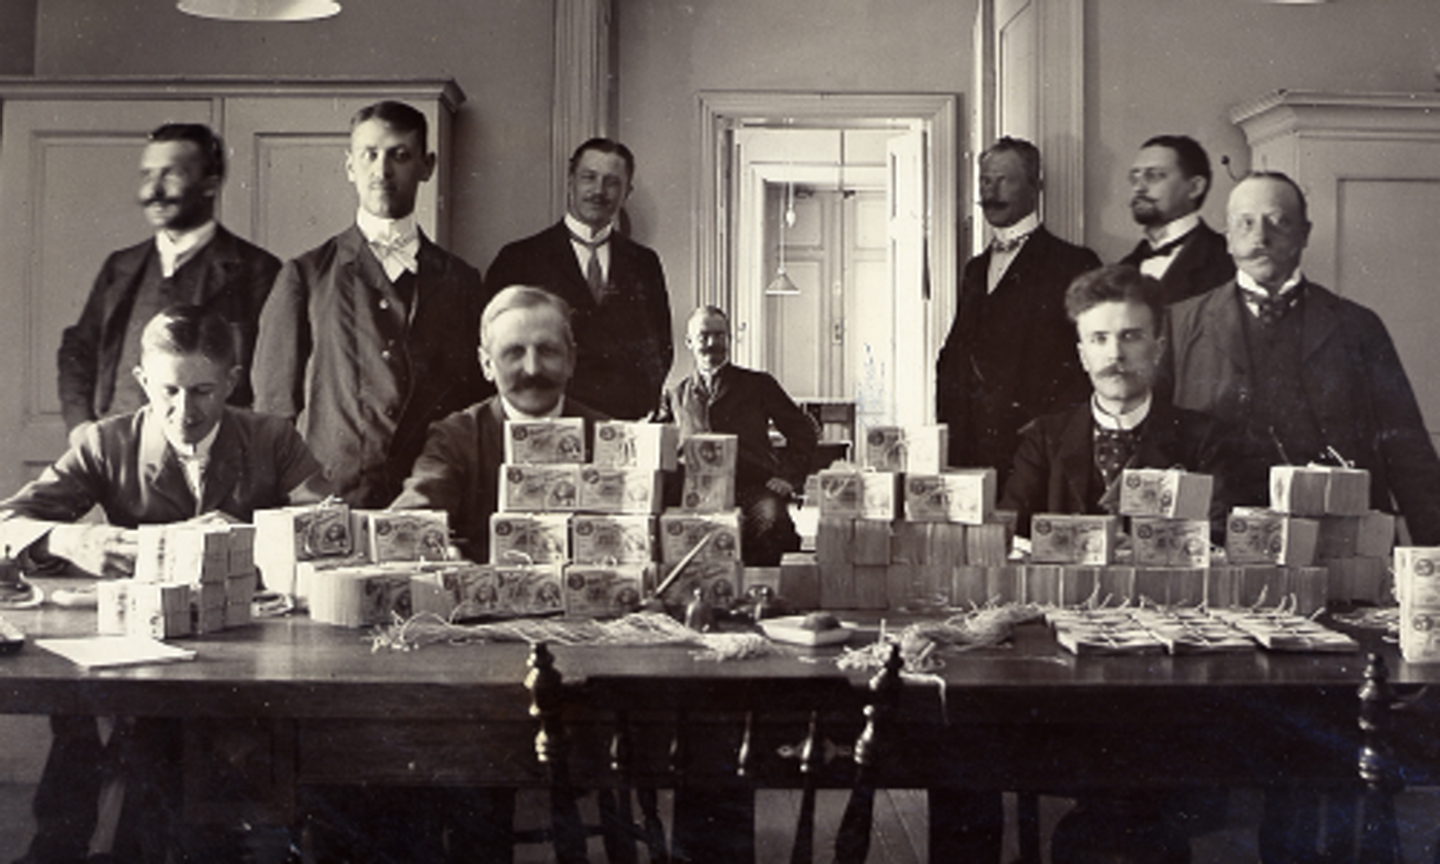 Counting banknotes at the Riksbank’s banknote office at Järntorget on 17 June 1904.